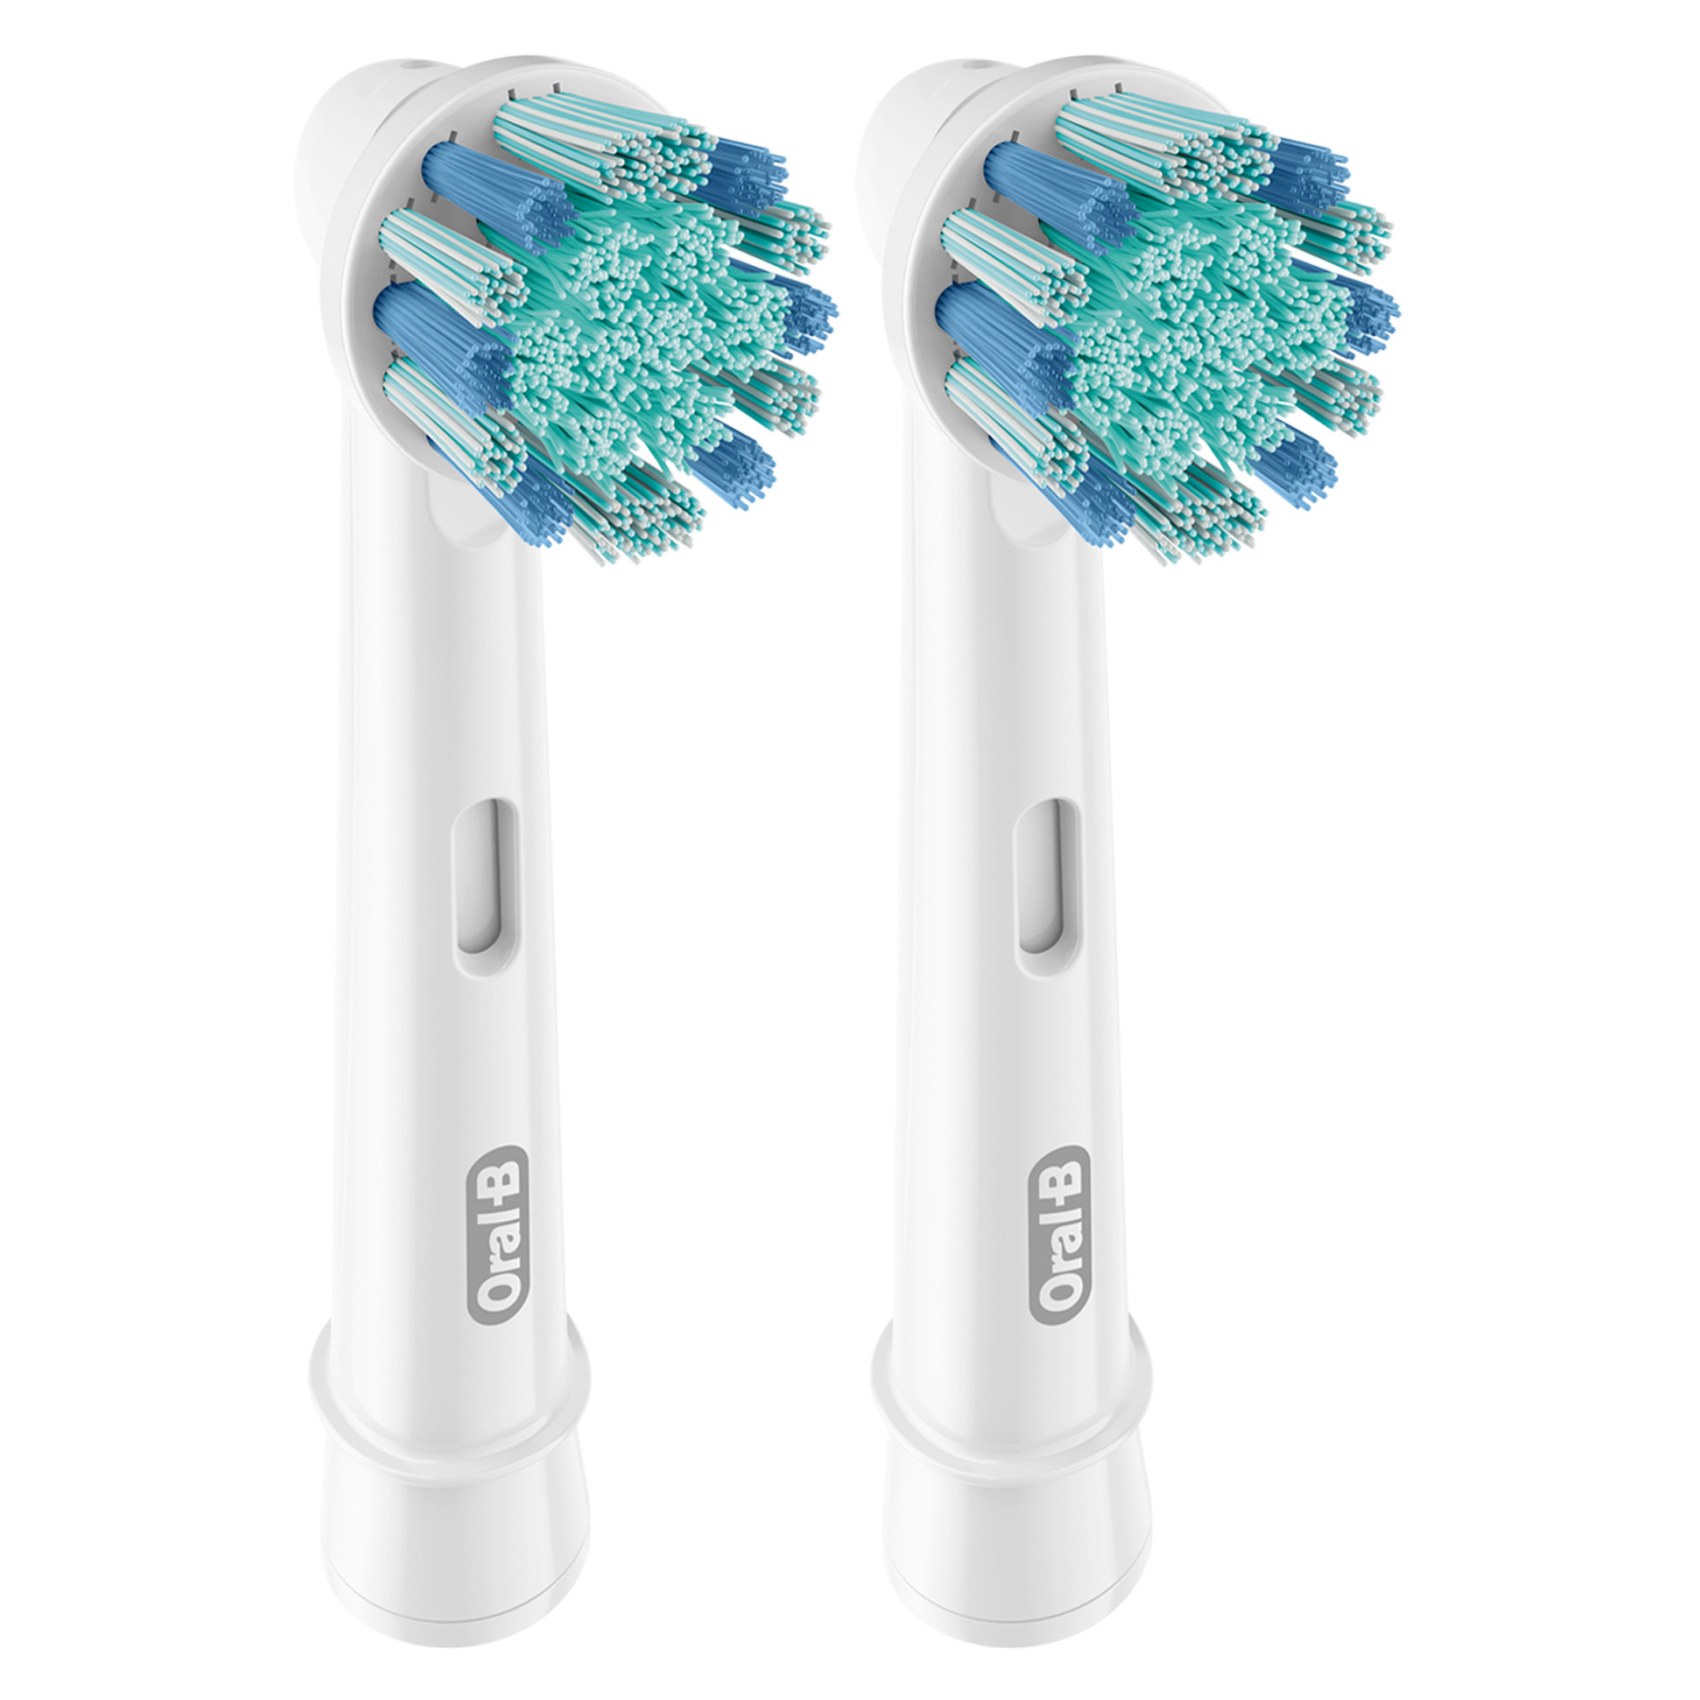 Oral-B Kids Electric Rechargeable Toothbrush Heads EB10S-2 SW White 2 PCS